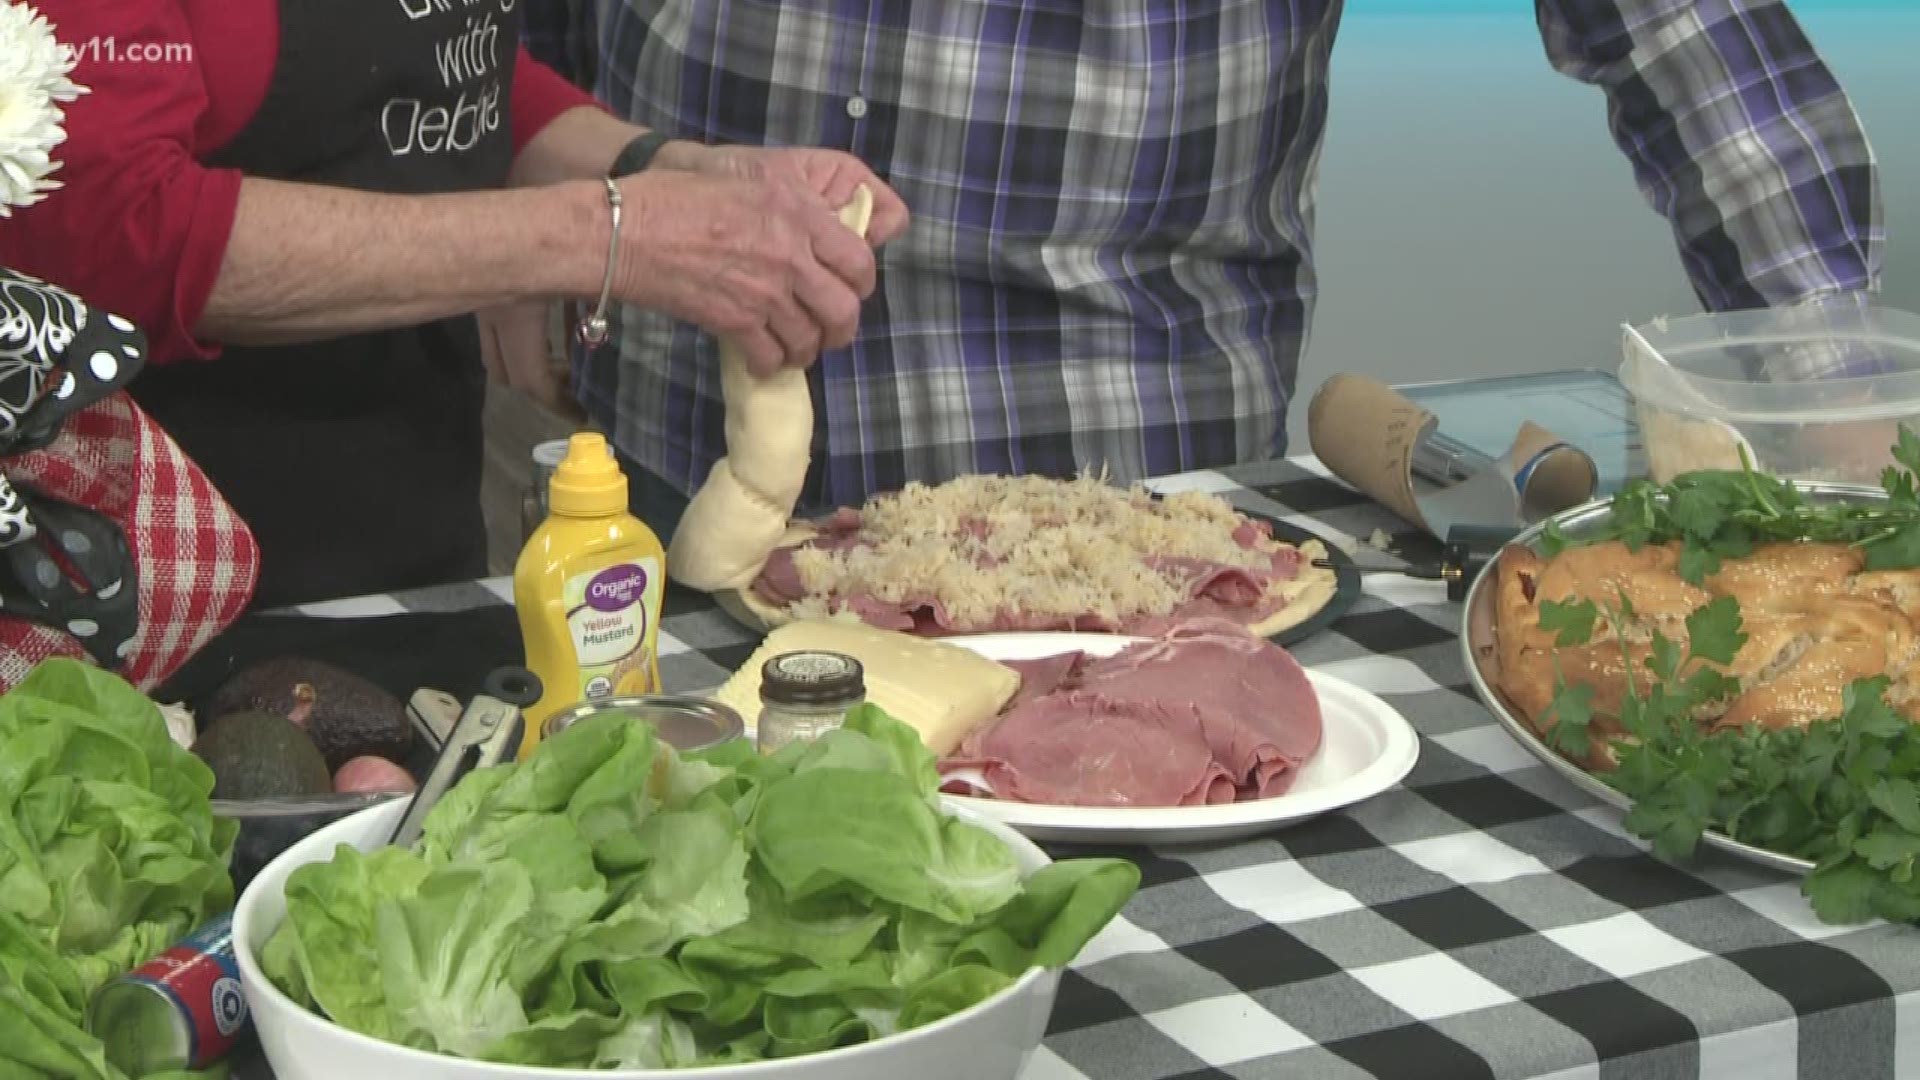 Debbie Arnold with Dining with Debbie is here with some delicious recipes for dinner or your bowl-watch party!